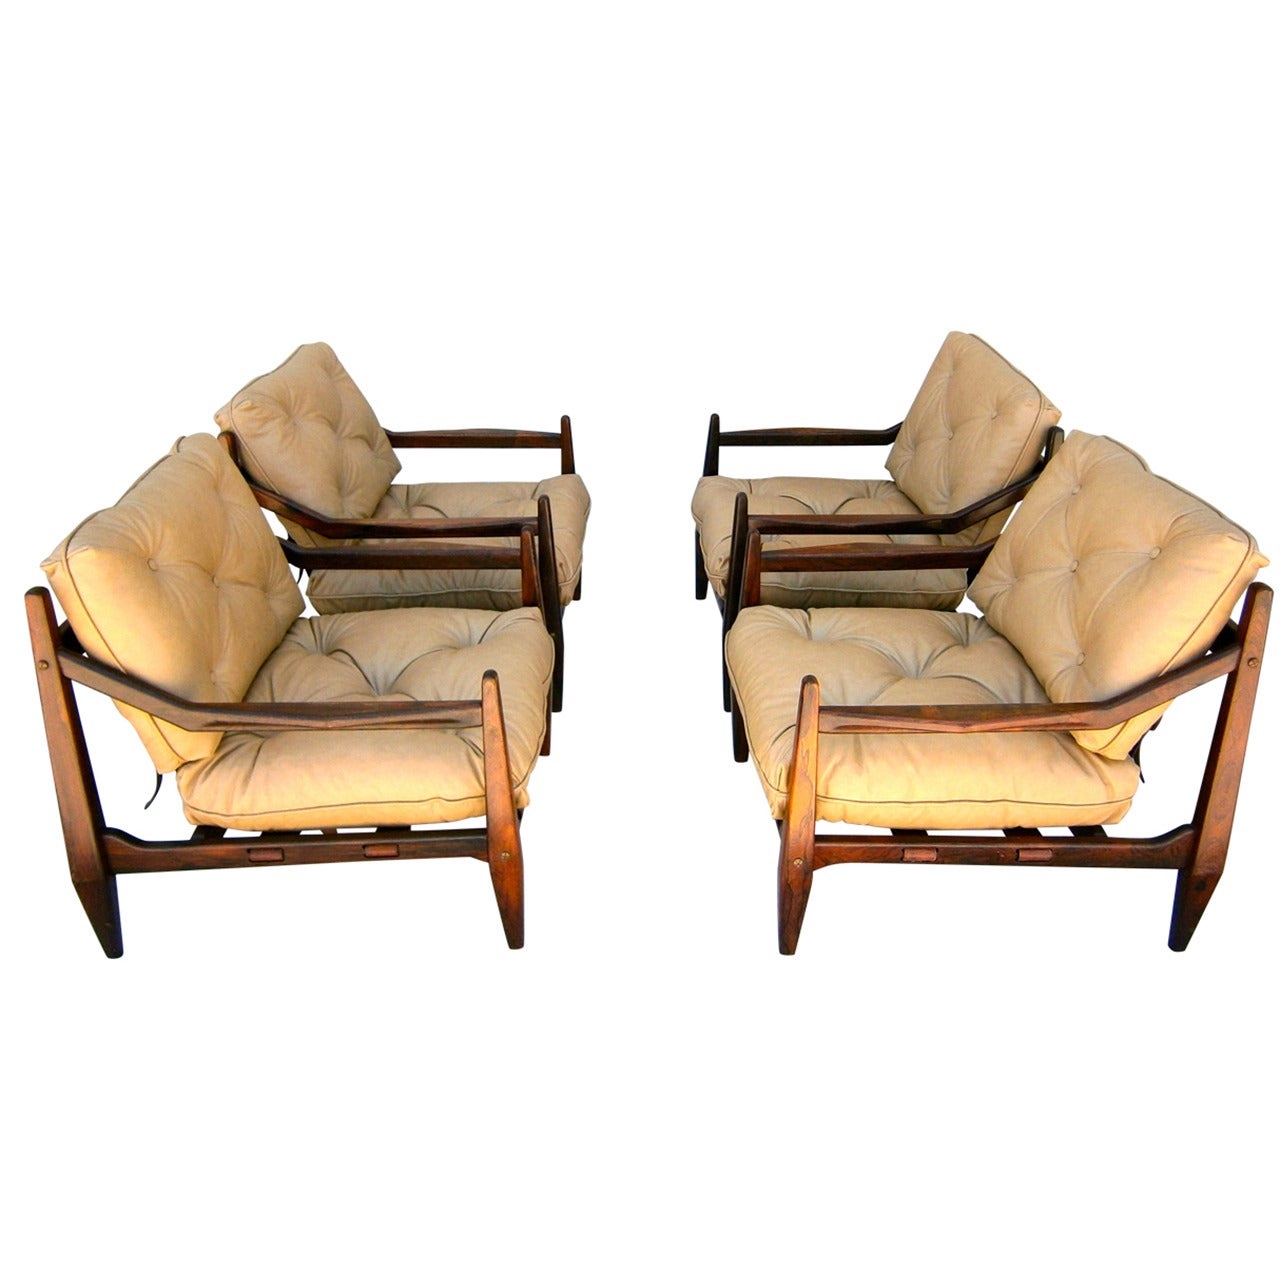 Incredible Set of Four Jacaranda Armchairs Designed by Jean Gillon, circa 1960s For Sale